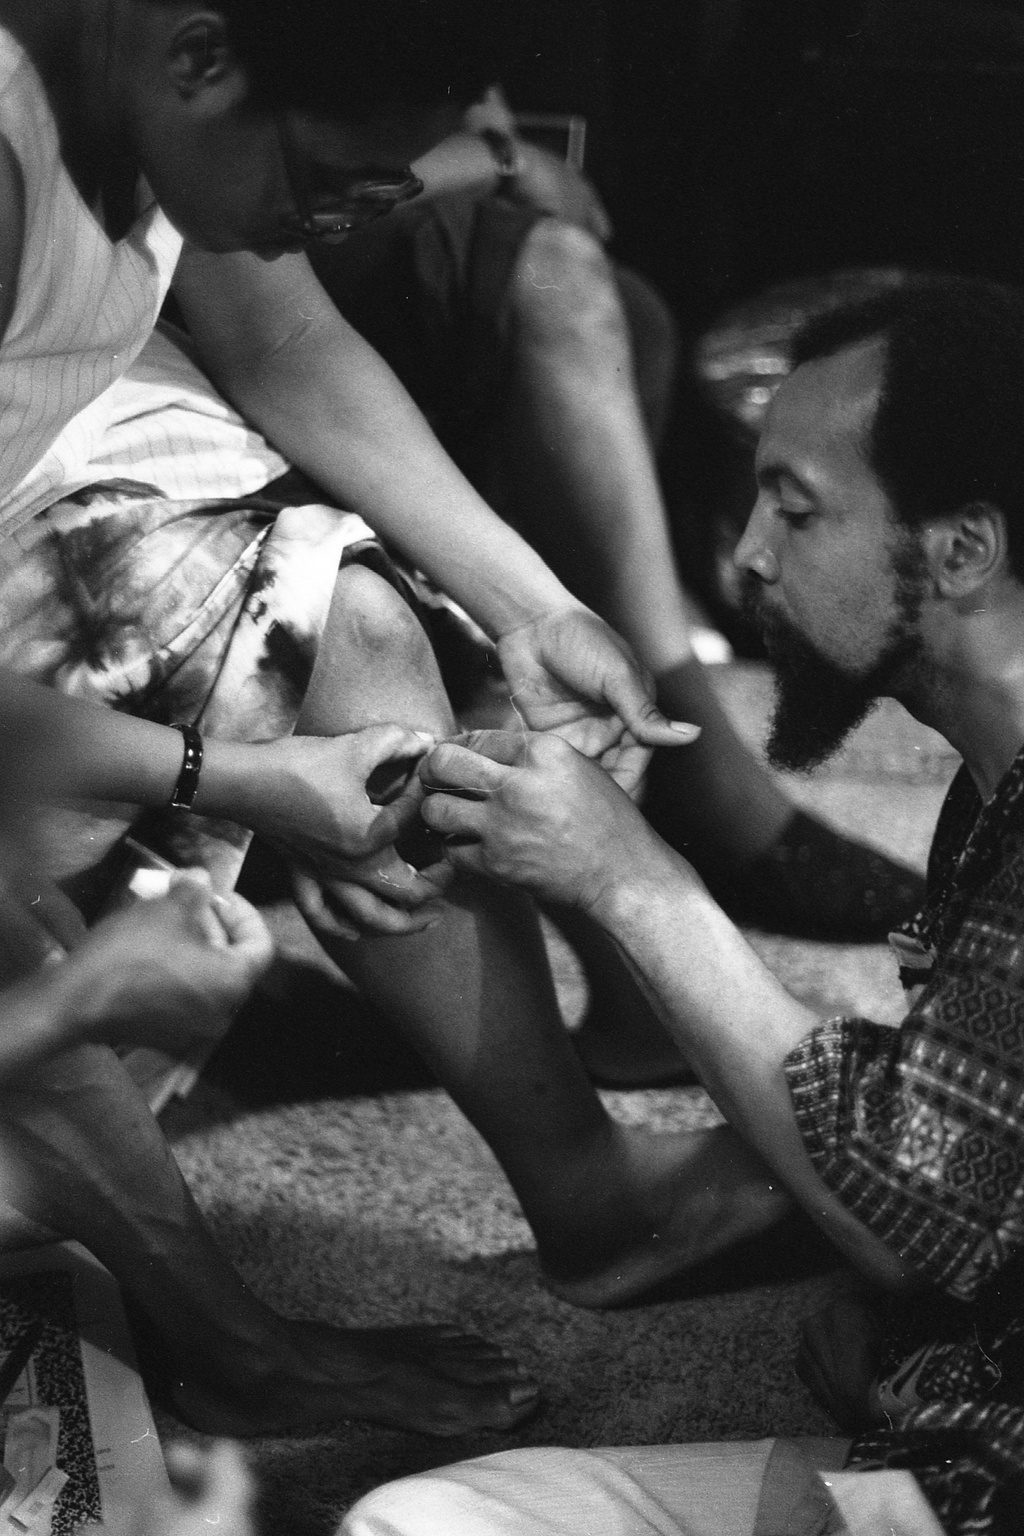 A black and white photograph of a person in a short-sleeved collared shirt with a patchwork pattern performing acupuncture on another person's knee. Both figures are sitting.&nbsp;